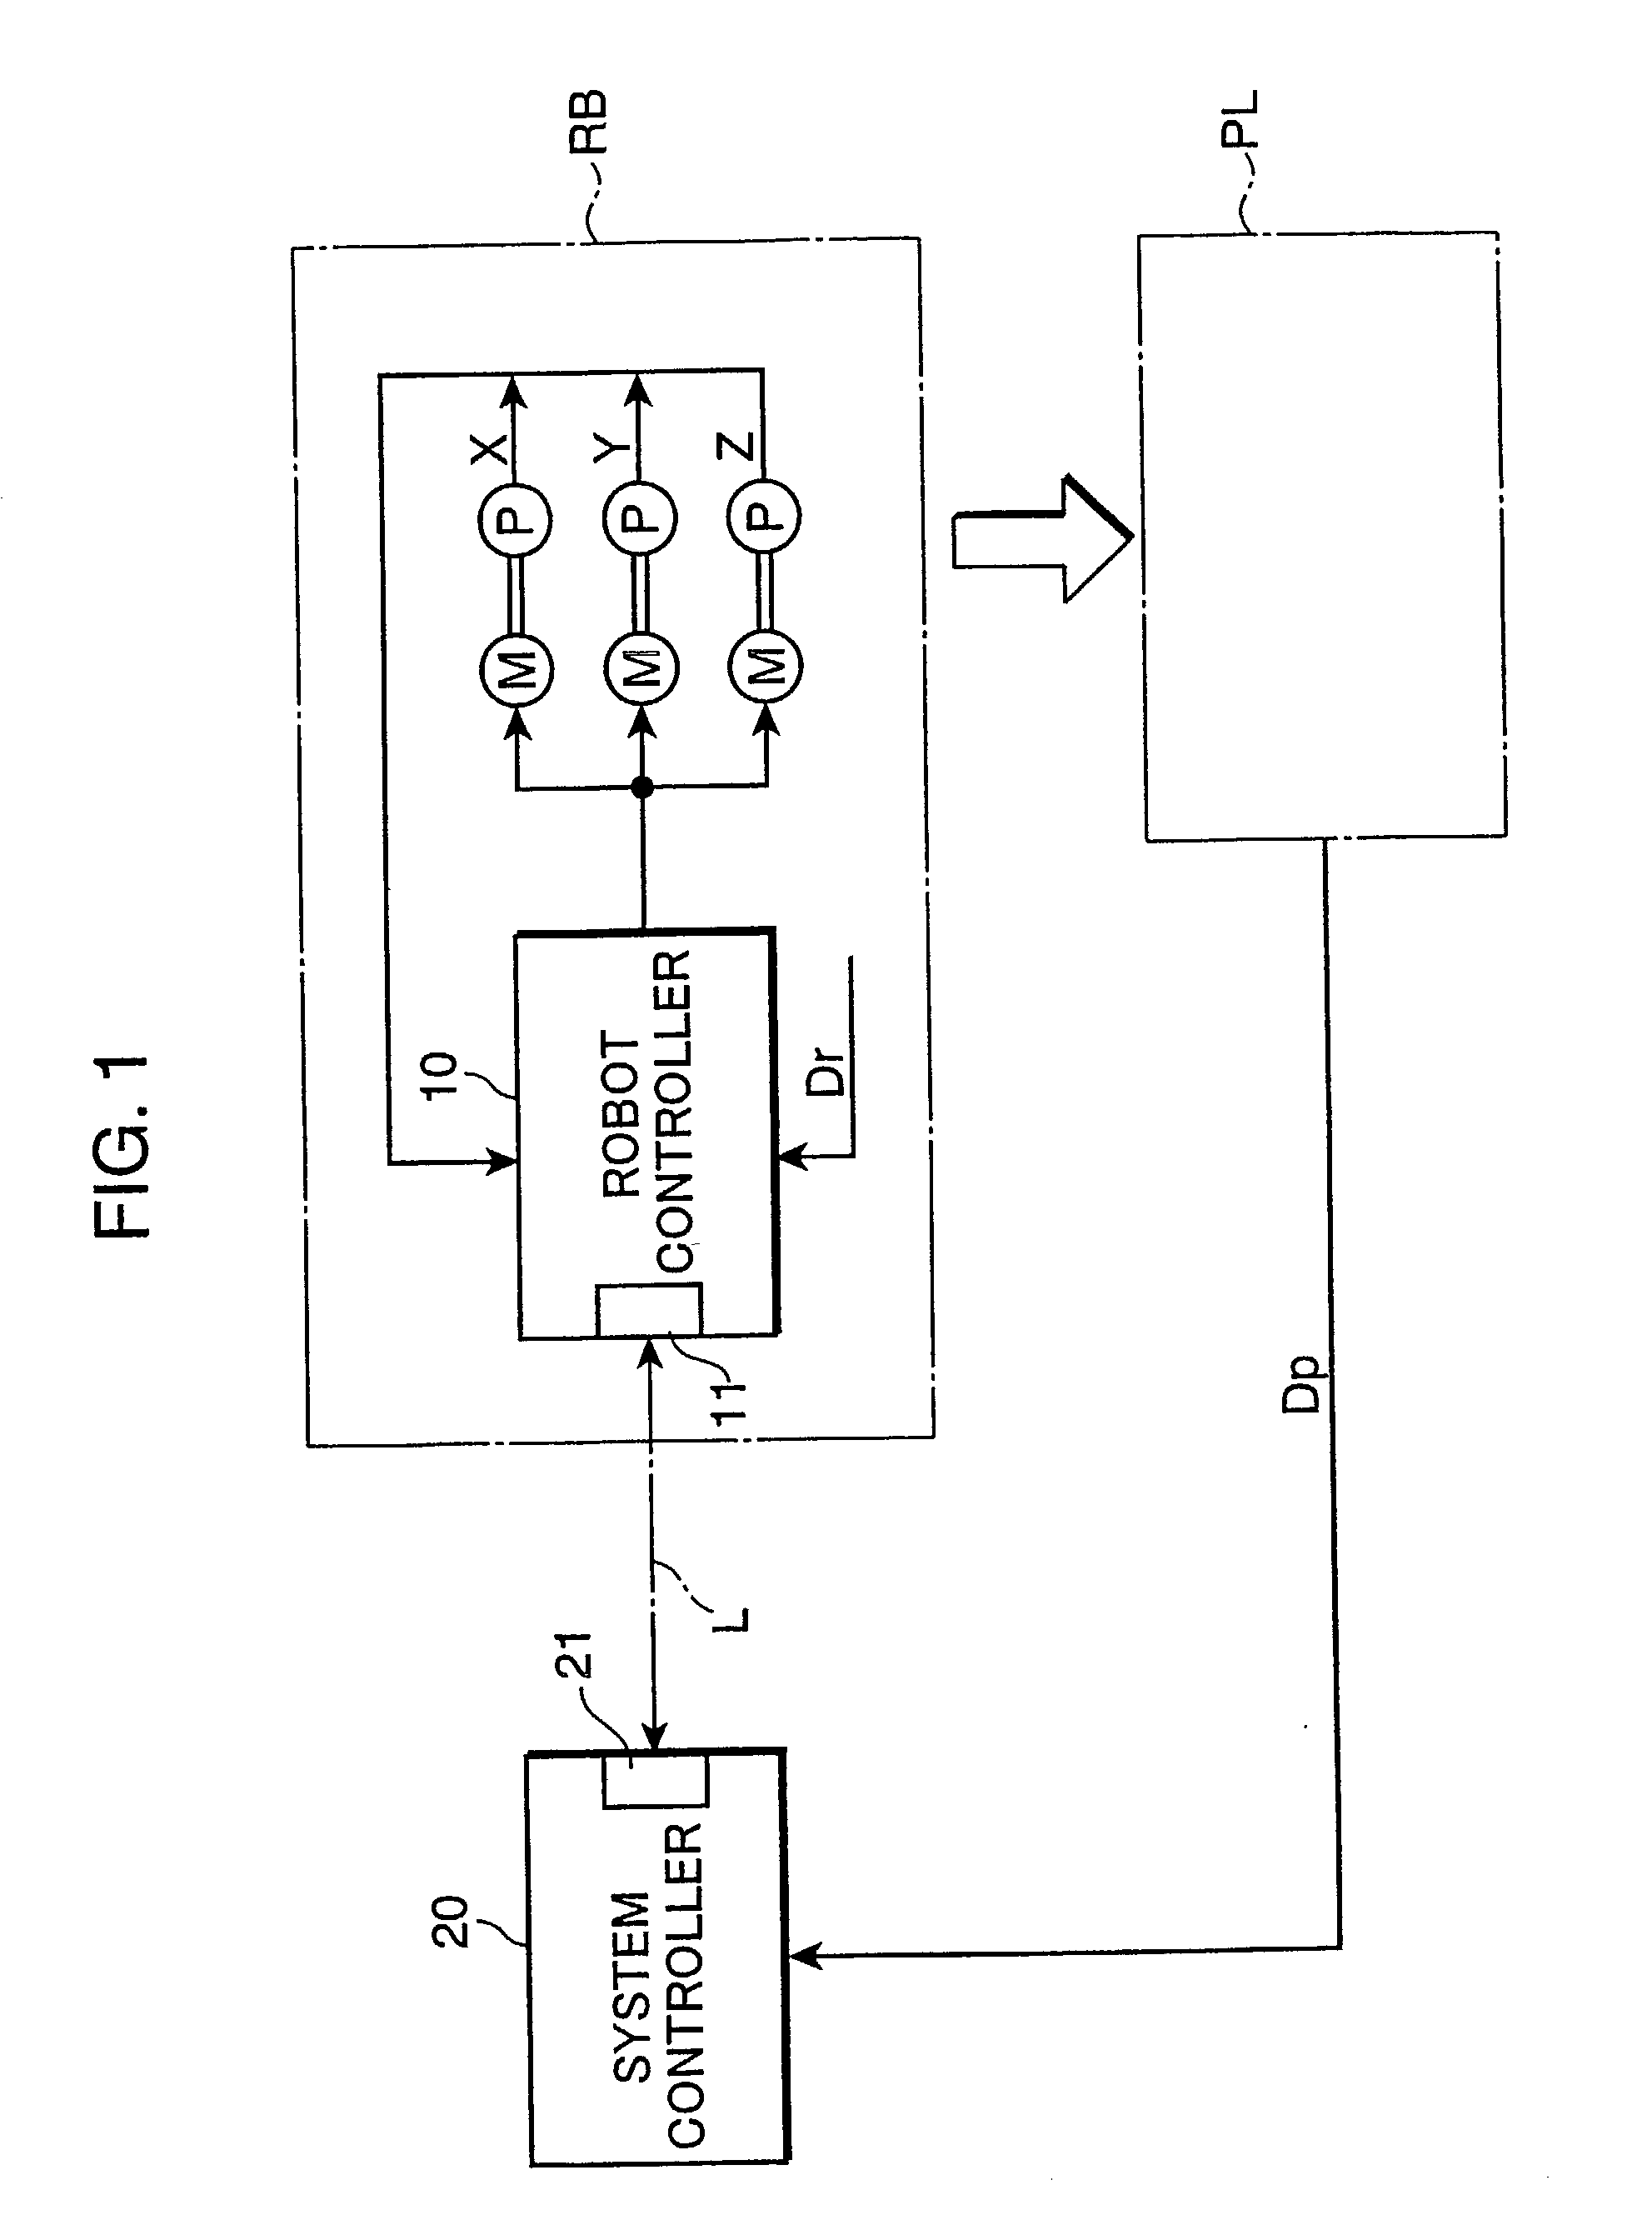 Method and system for controlling drive of a robot